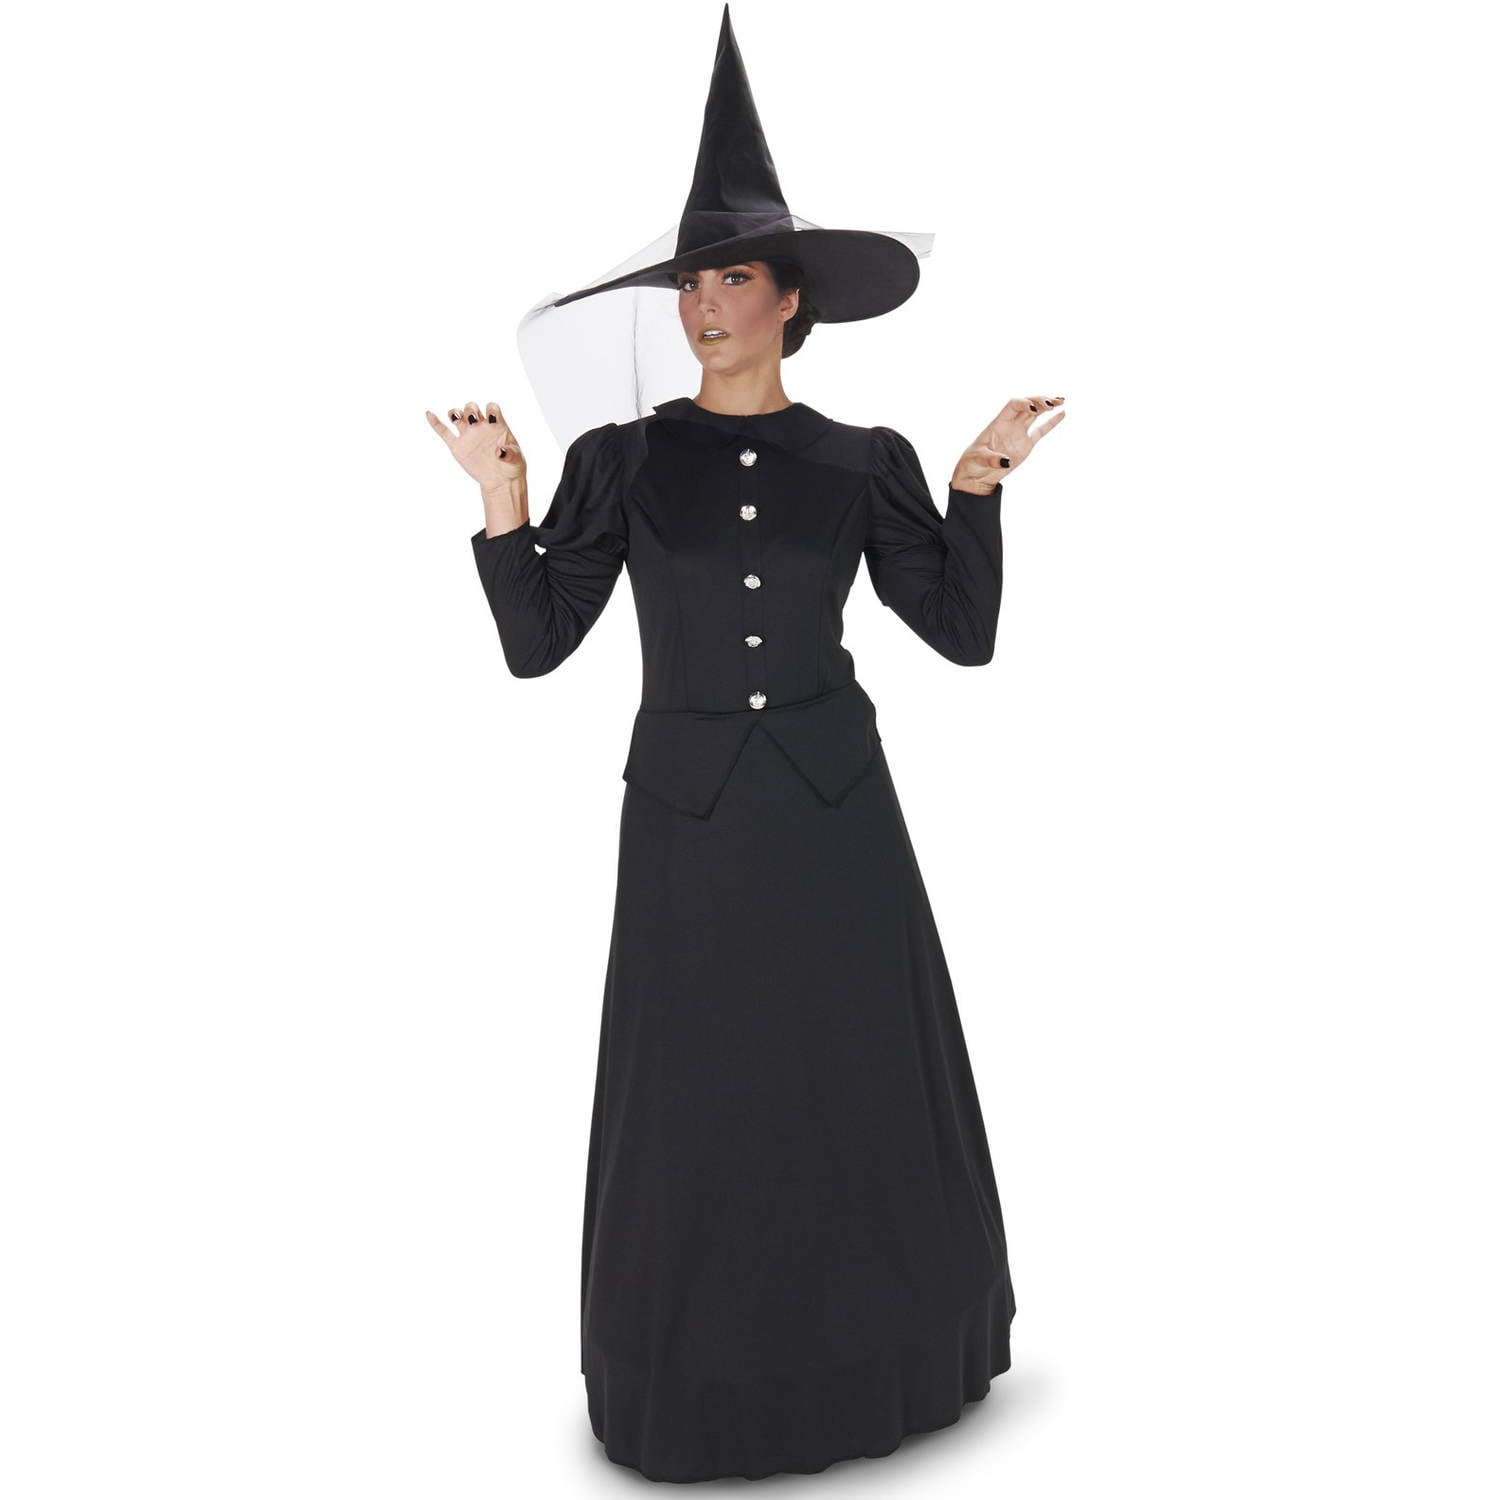 Sexy Wicked Witch Of The West Costume Pixmob 1540